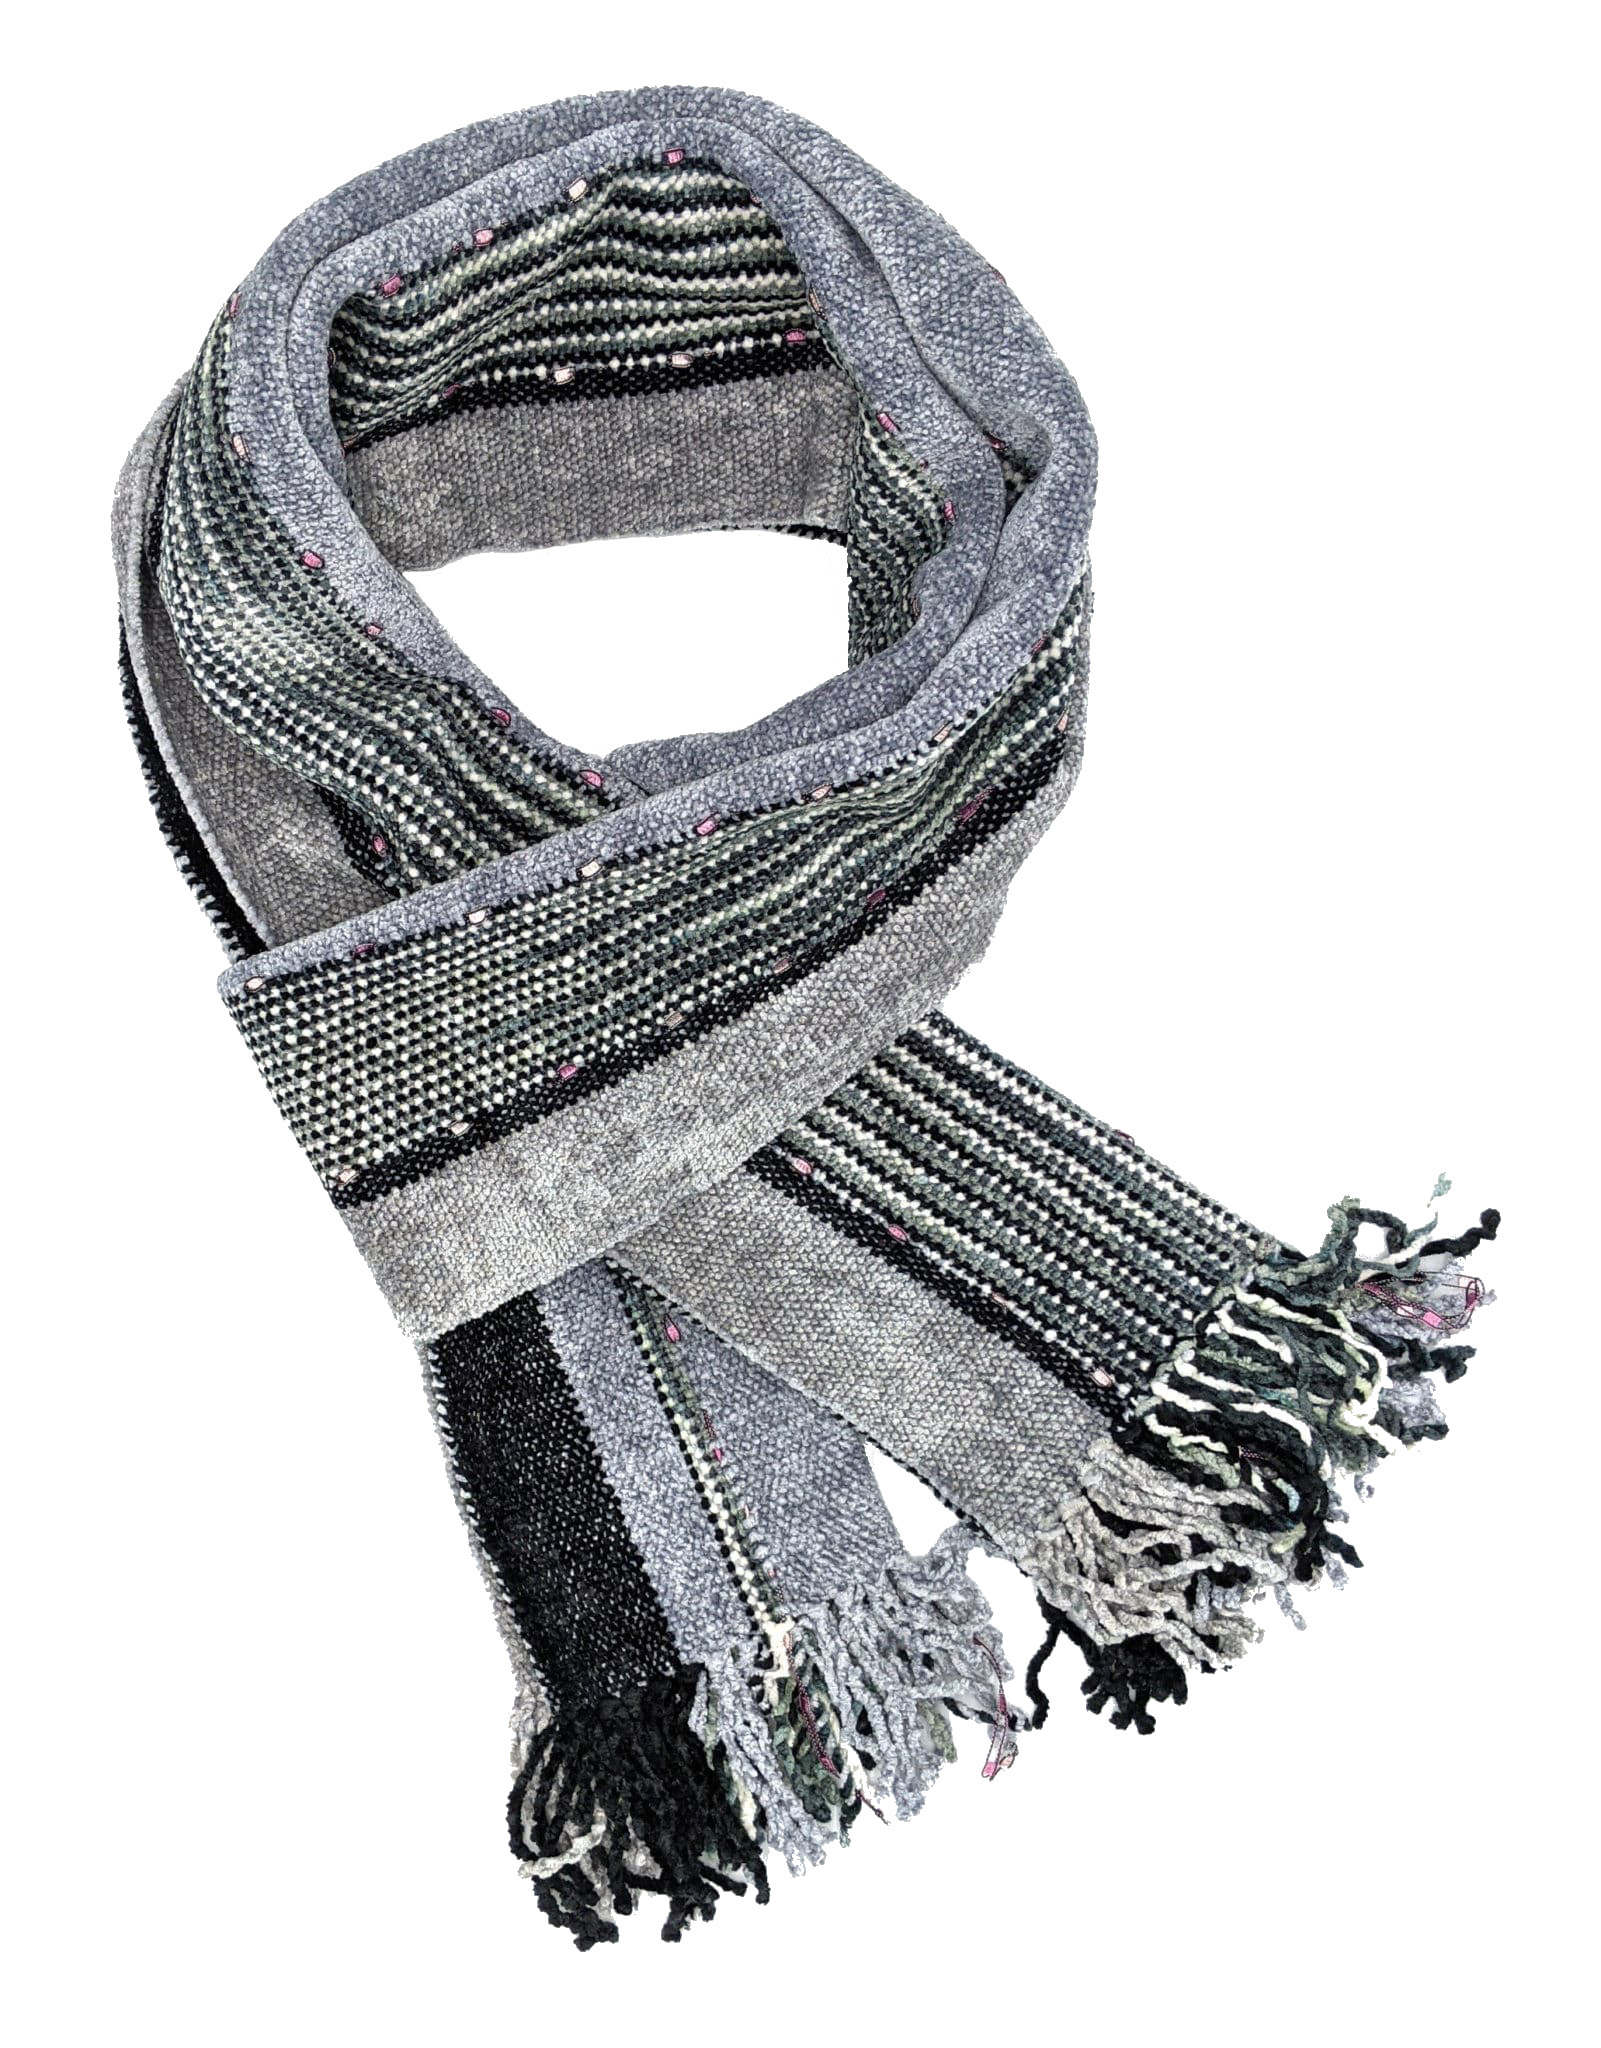 Black, Gray and White Stripes with Ornamental Yarn Accents Bamboo Chenille Handwoven Scarf 8 x 68